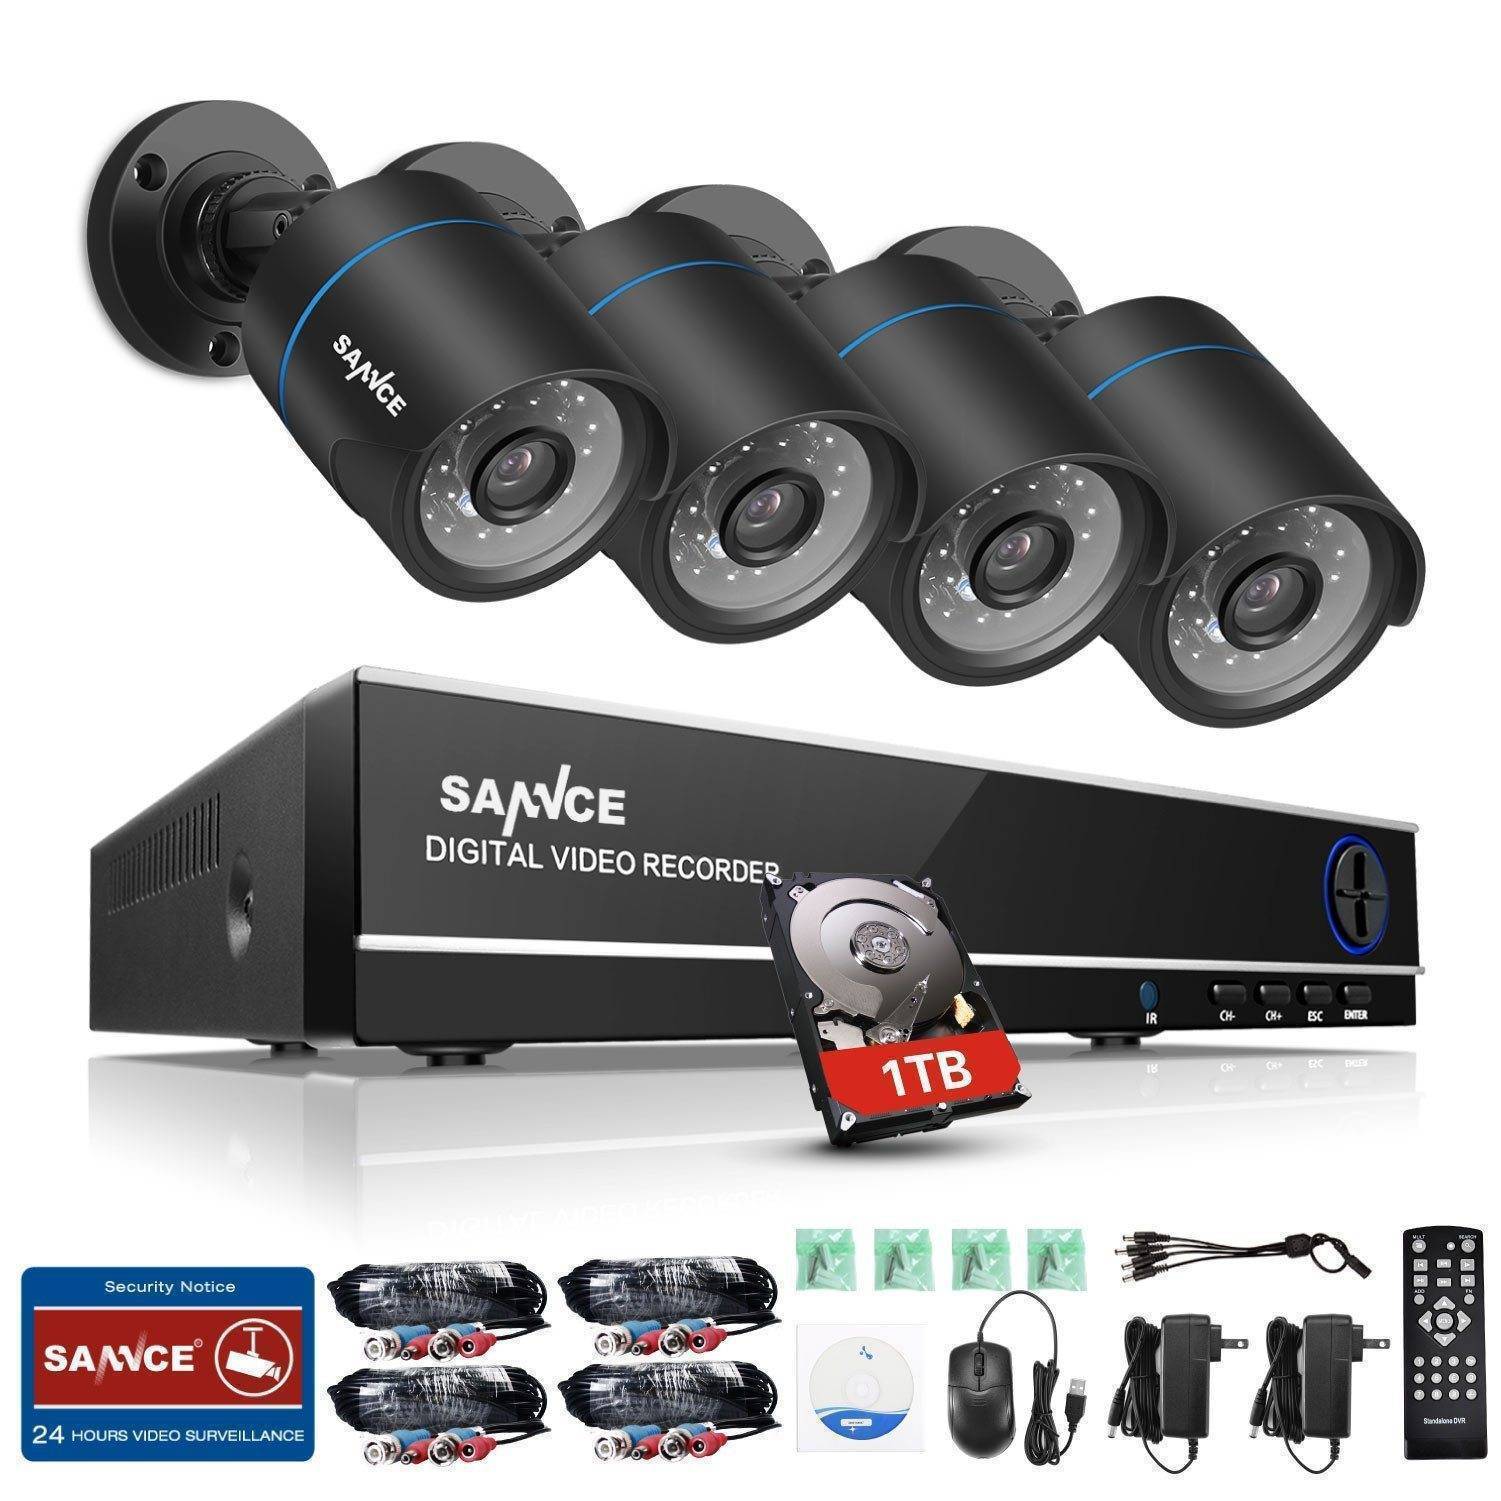 4 Channel Home Video Security Cameras System with Night Vision